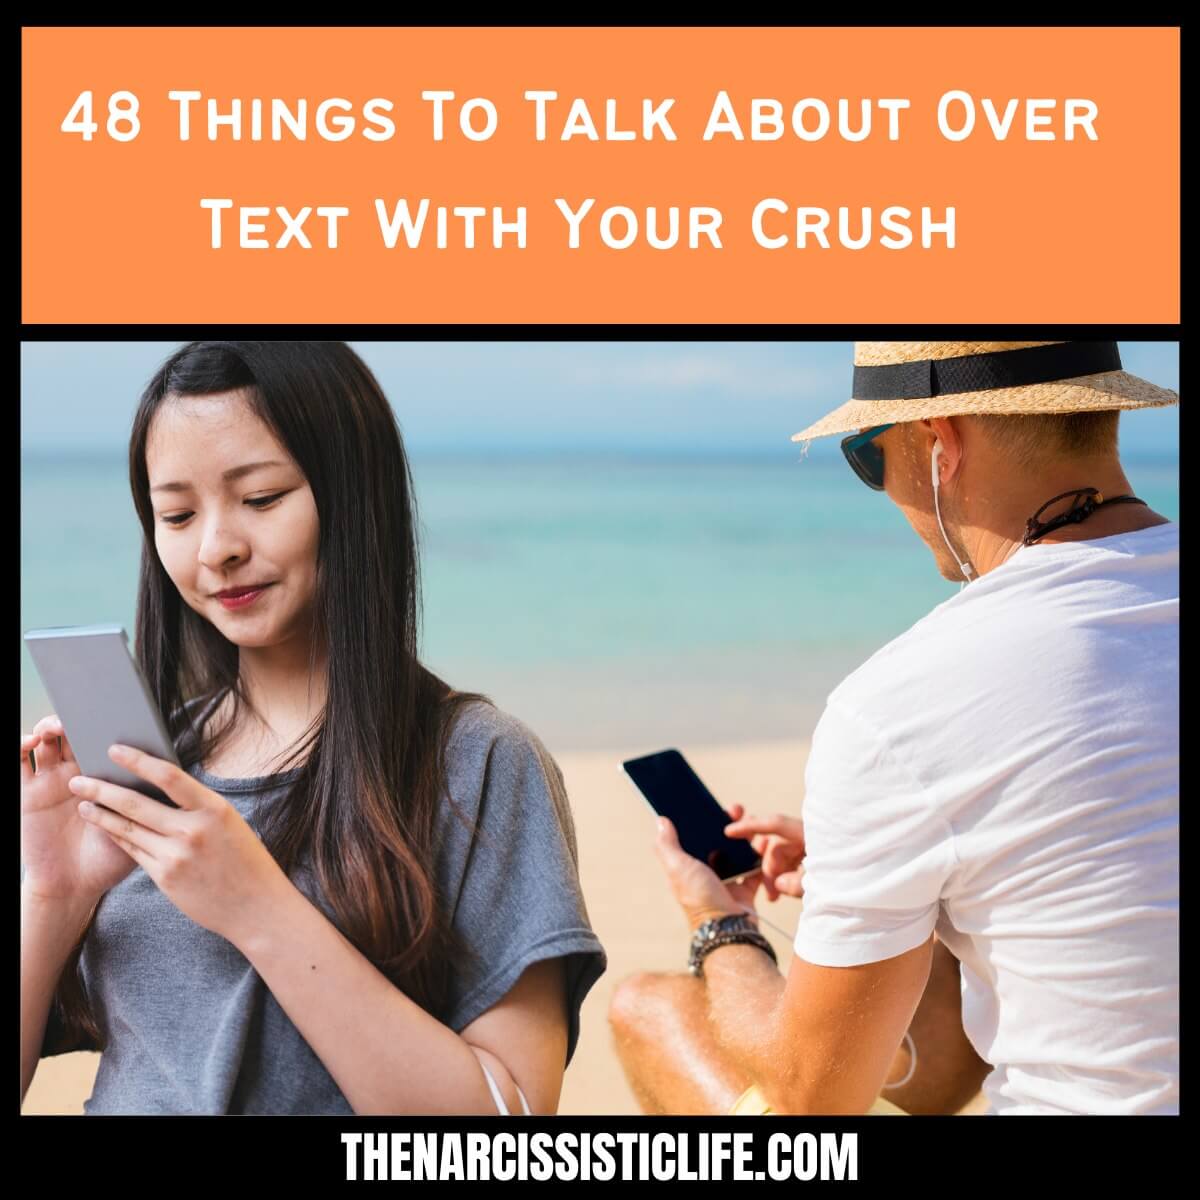 48 Things To Talk About Over Text With Your Crush